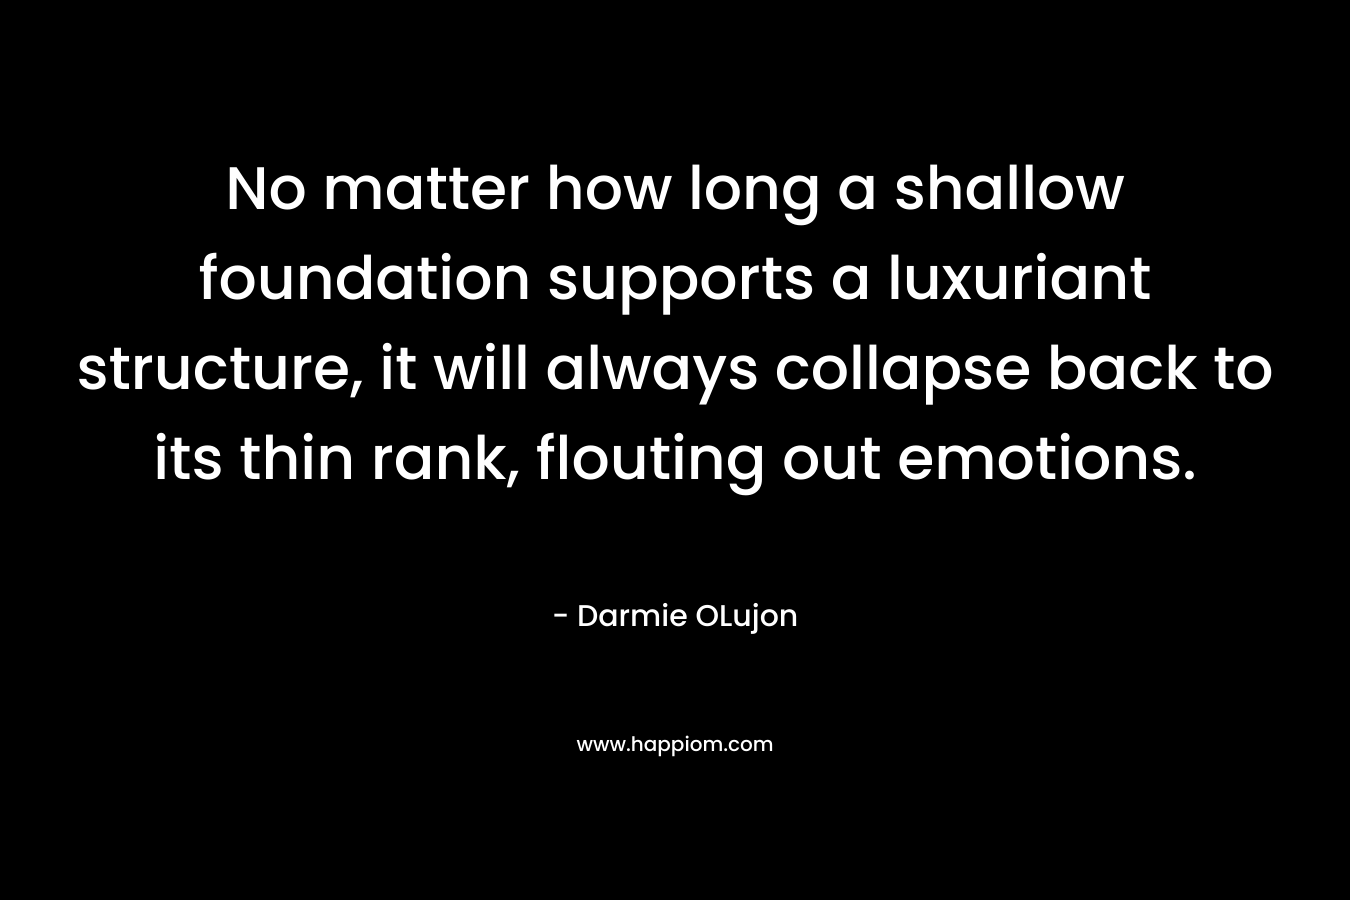 No matter how long a shallow foundation supports a luxuriant structure, it will always collapse back to its thin rank, flouting out emotions. – Darmie OLujon